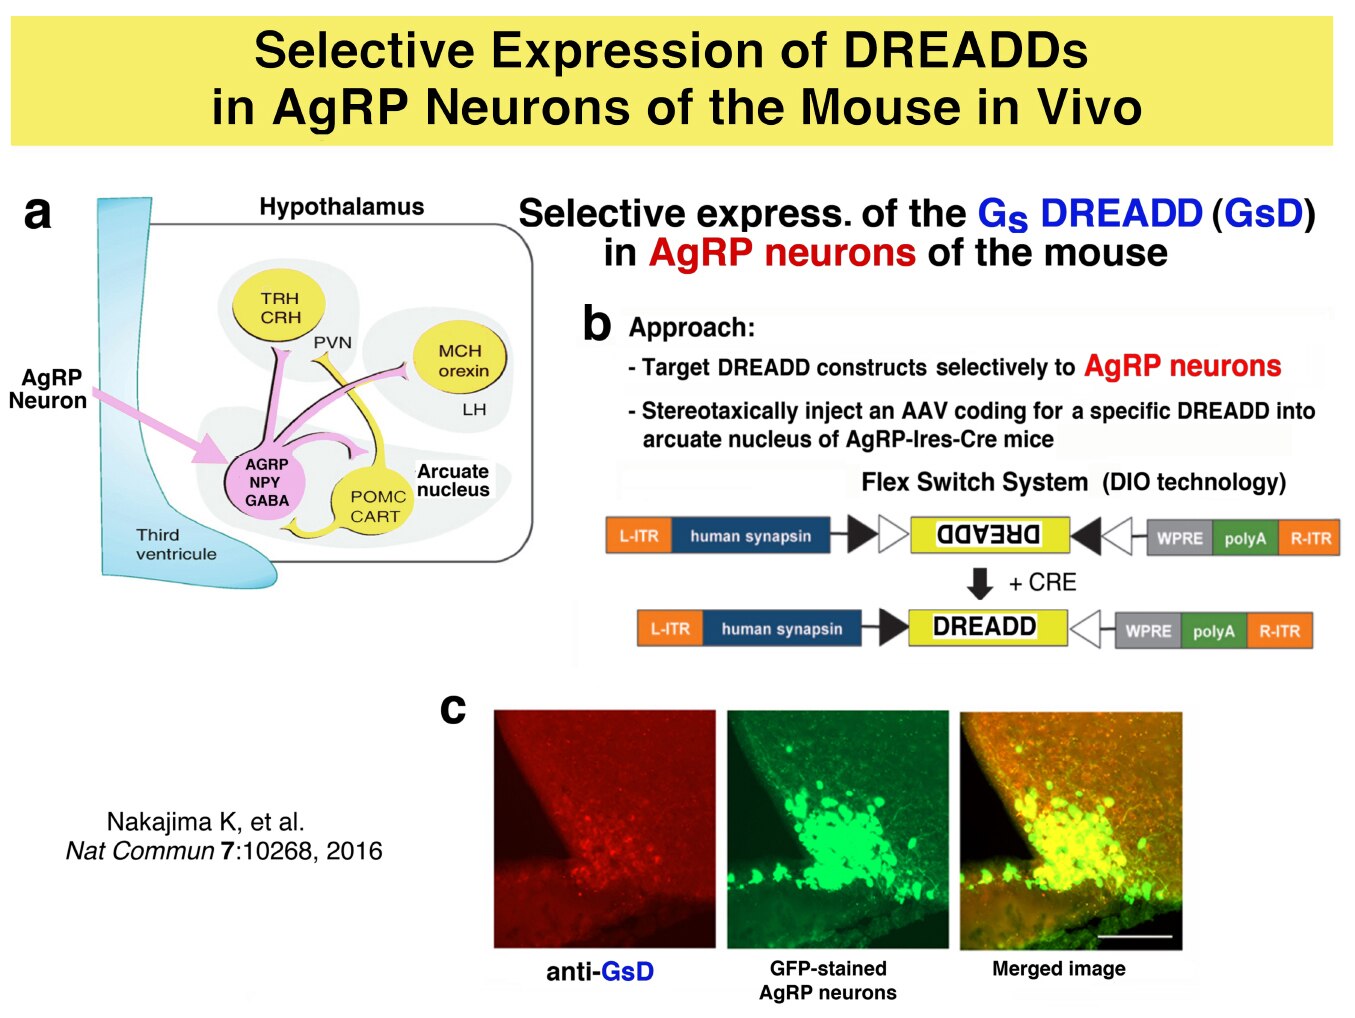 Chart explaining Selective expression of a Gs-coupled designer receptor (Gs DREADD) in mouse AgRP neurons